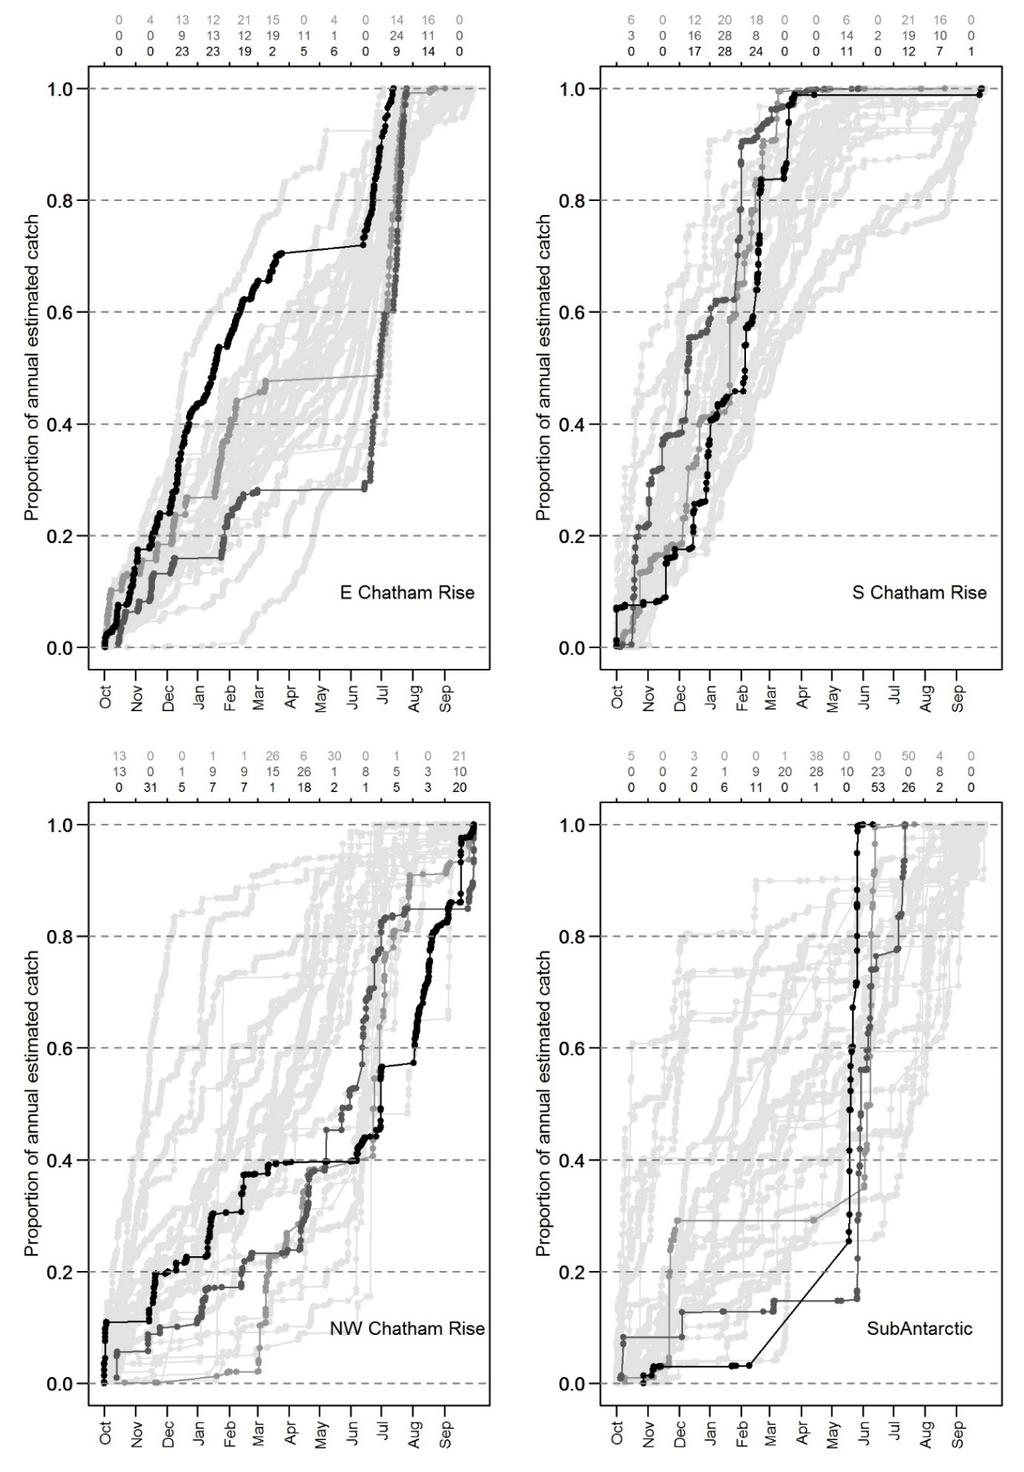 Figure 4: Cumulative catches and effort in ORH 3B. Catches are summed in chronological order through the fishing year, and scaled to the total estimated catch for the year.